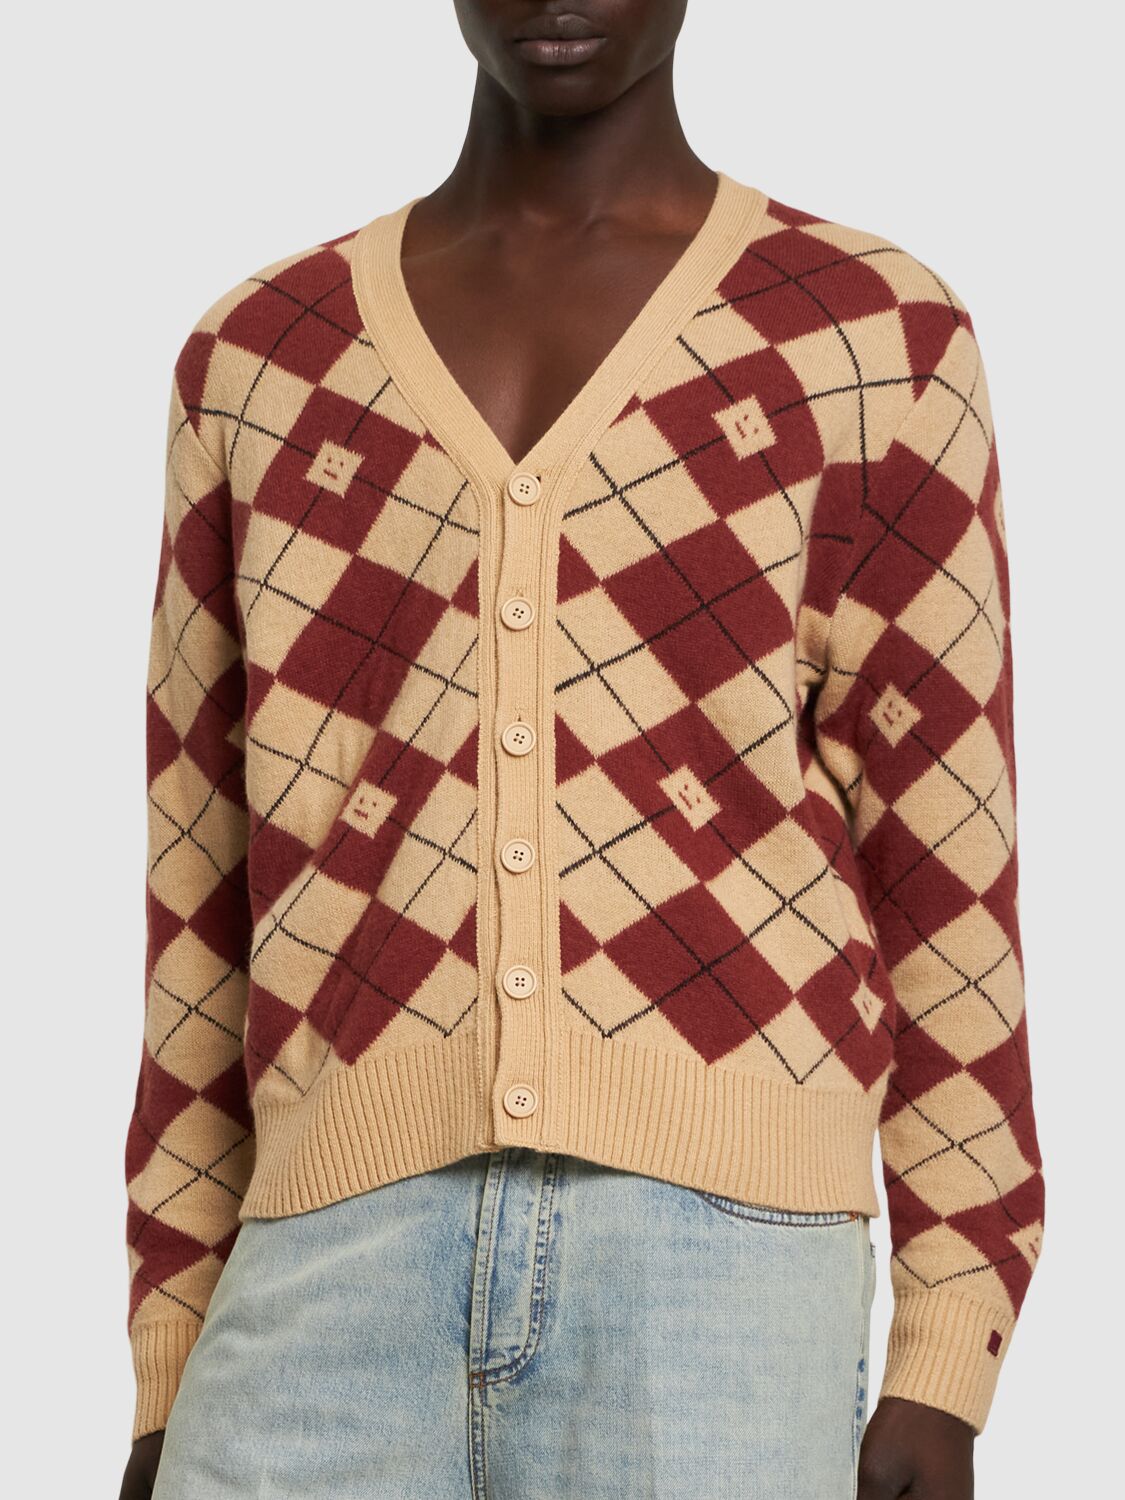 Acne Studios - Katch Jacquard-Knit Wool and Cotton-Blend Sweater - Pink  Acne Studios